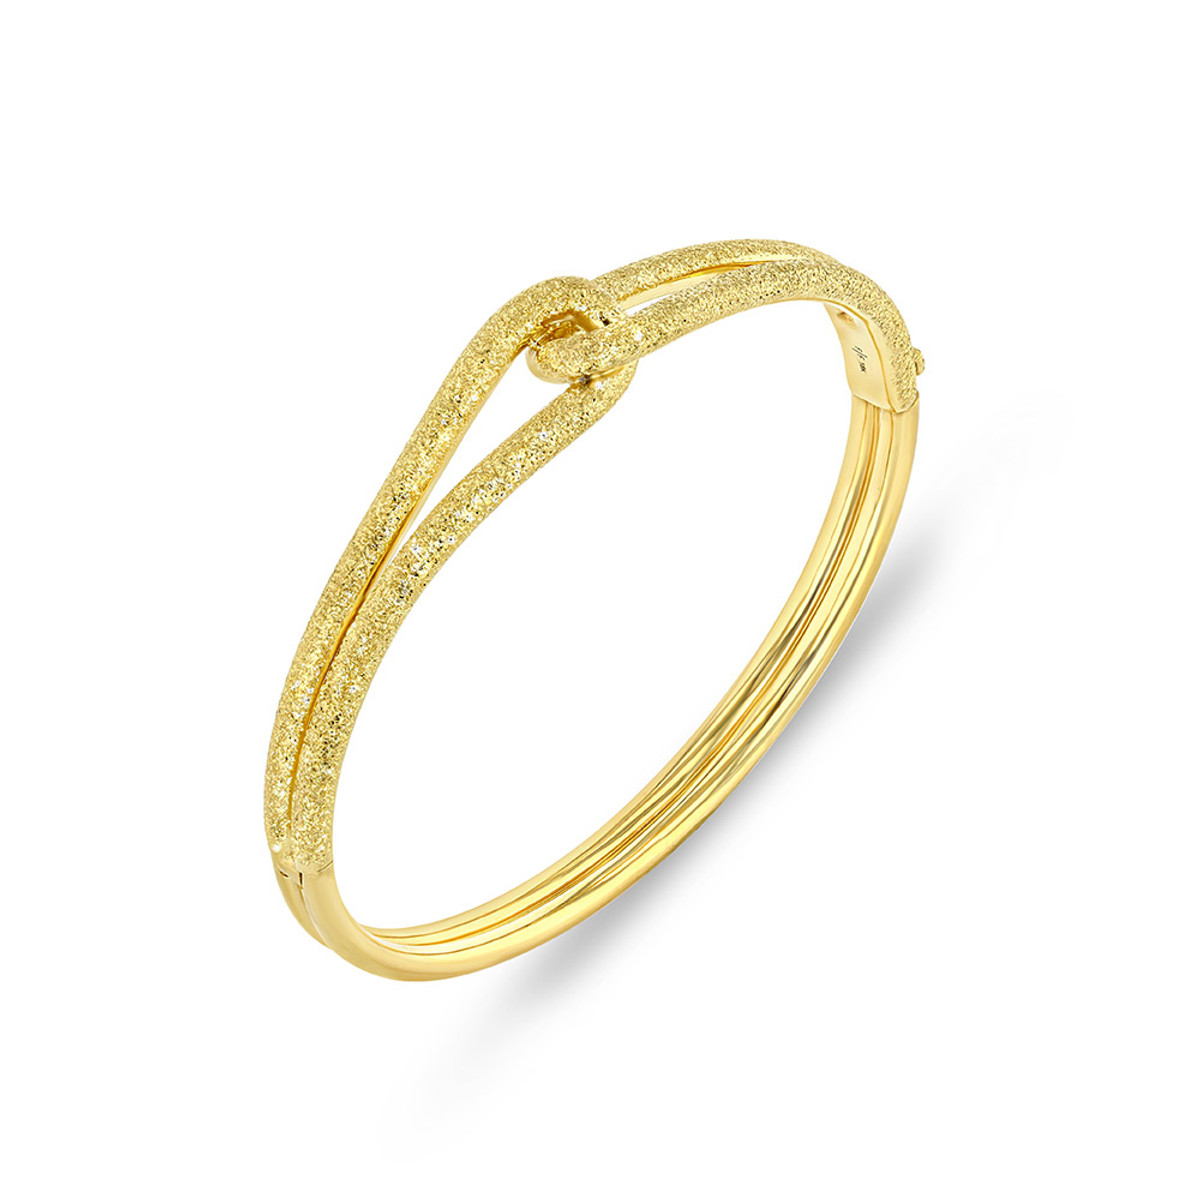 Future Fortune 18K Yellow Gold Tie The Knot Bangle-55965